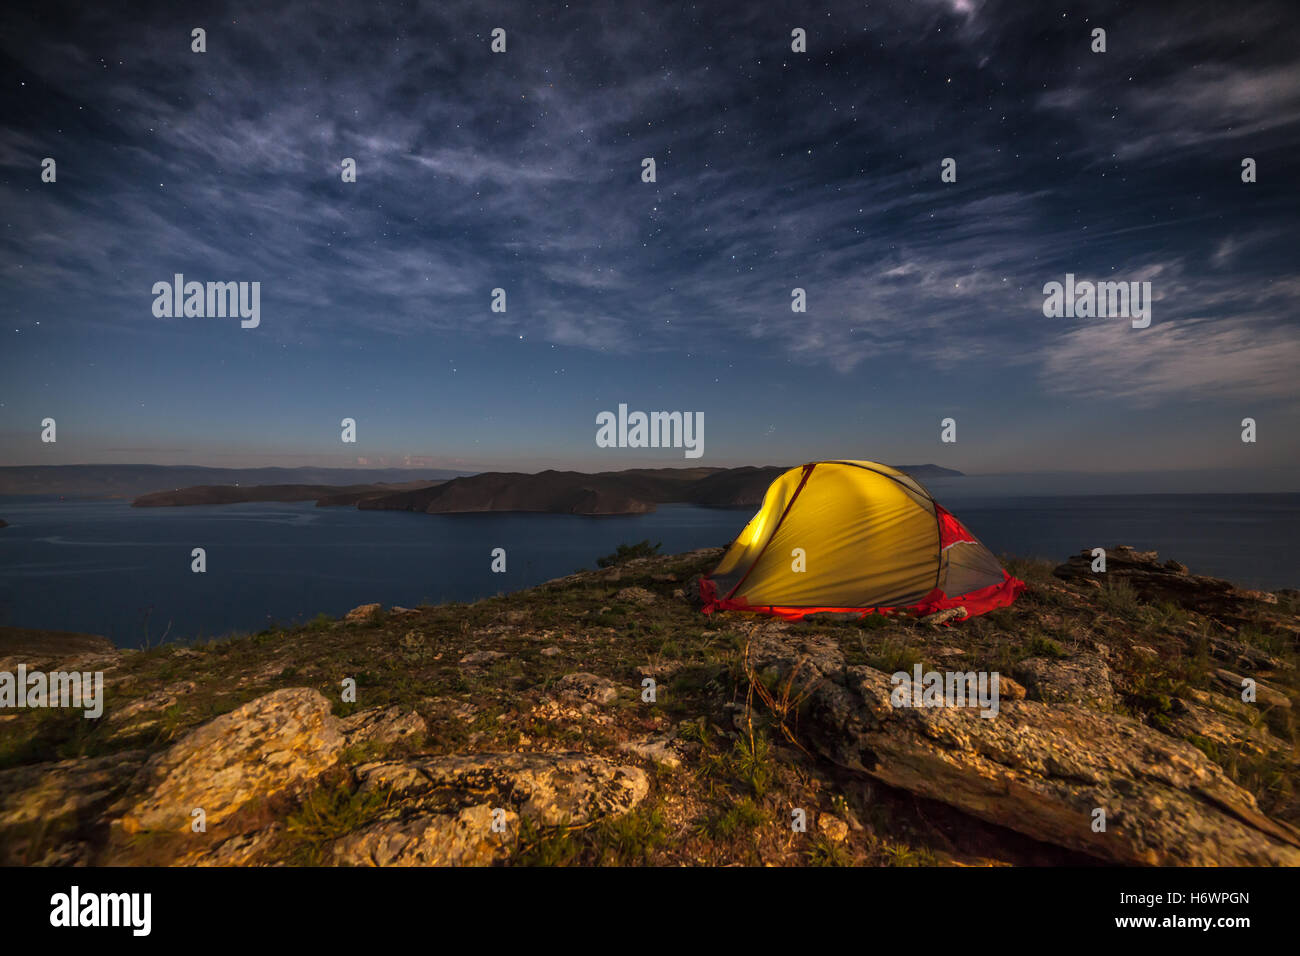 Tent against mountain at night Stock Photo